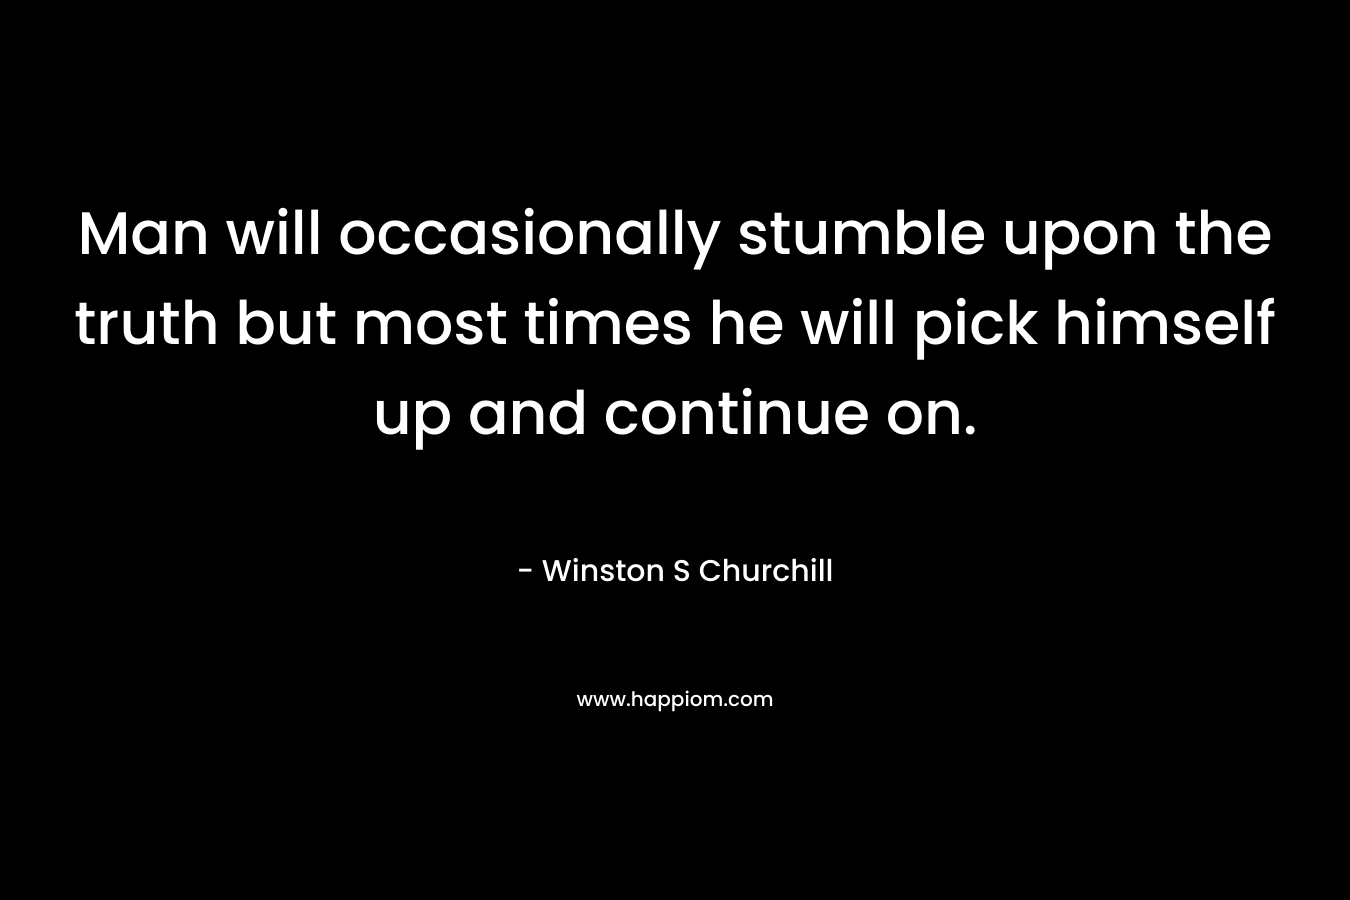 Man will occasionally stumble upon the truth but most times he will pick himself up and continue on.